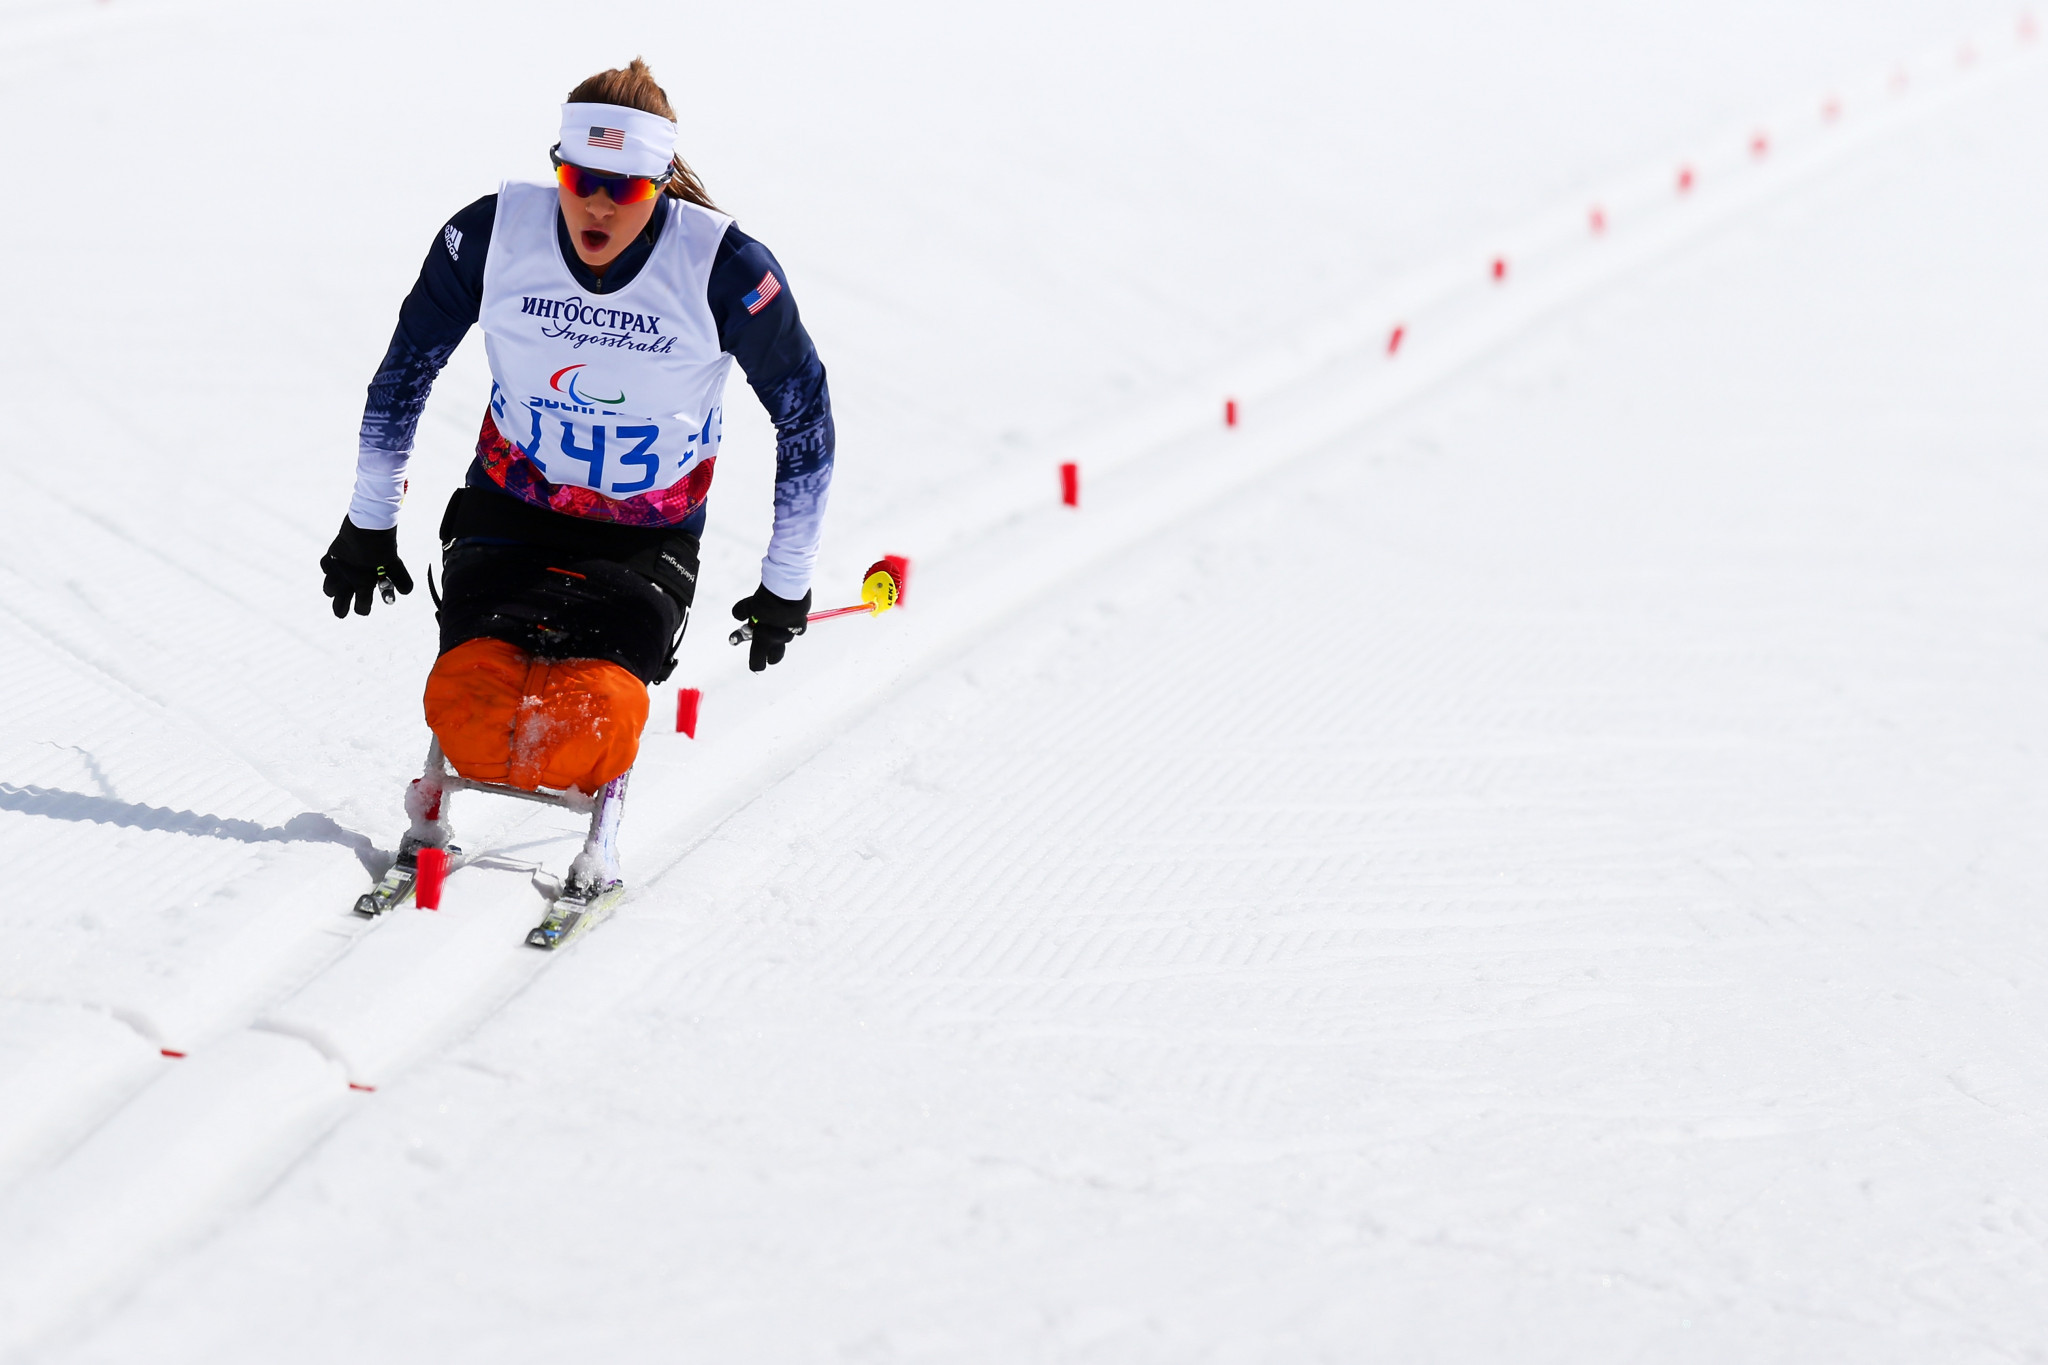 The United States' Oksana Masters looks on course to grab the overall titles in the sitting cross-country and biathlon races, despite not competing in Vuokatti ©Getty Images